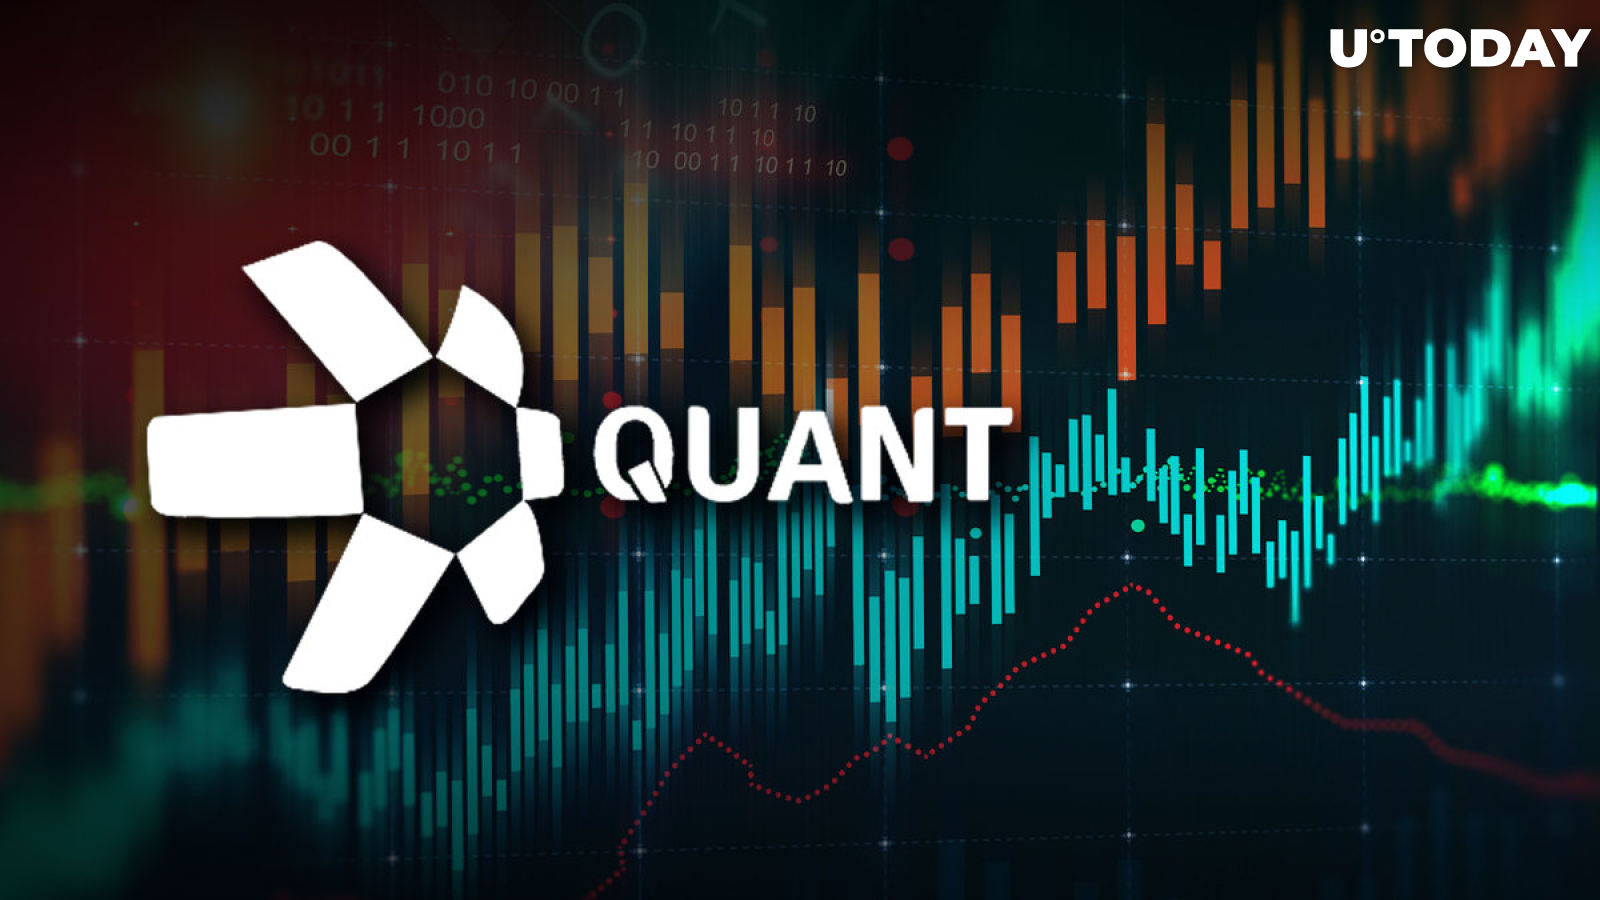 QNT Price Escalated 150% Since September with Another Massive Spike Today